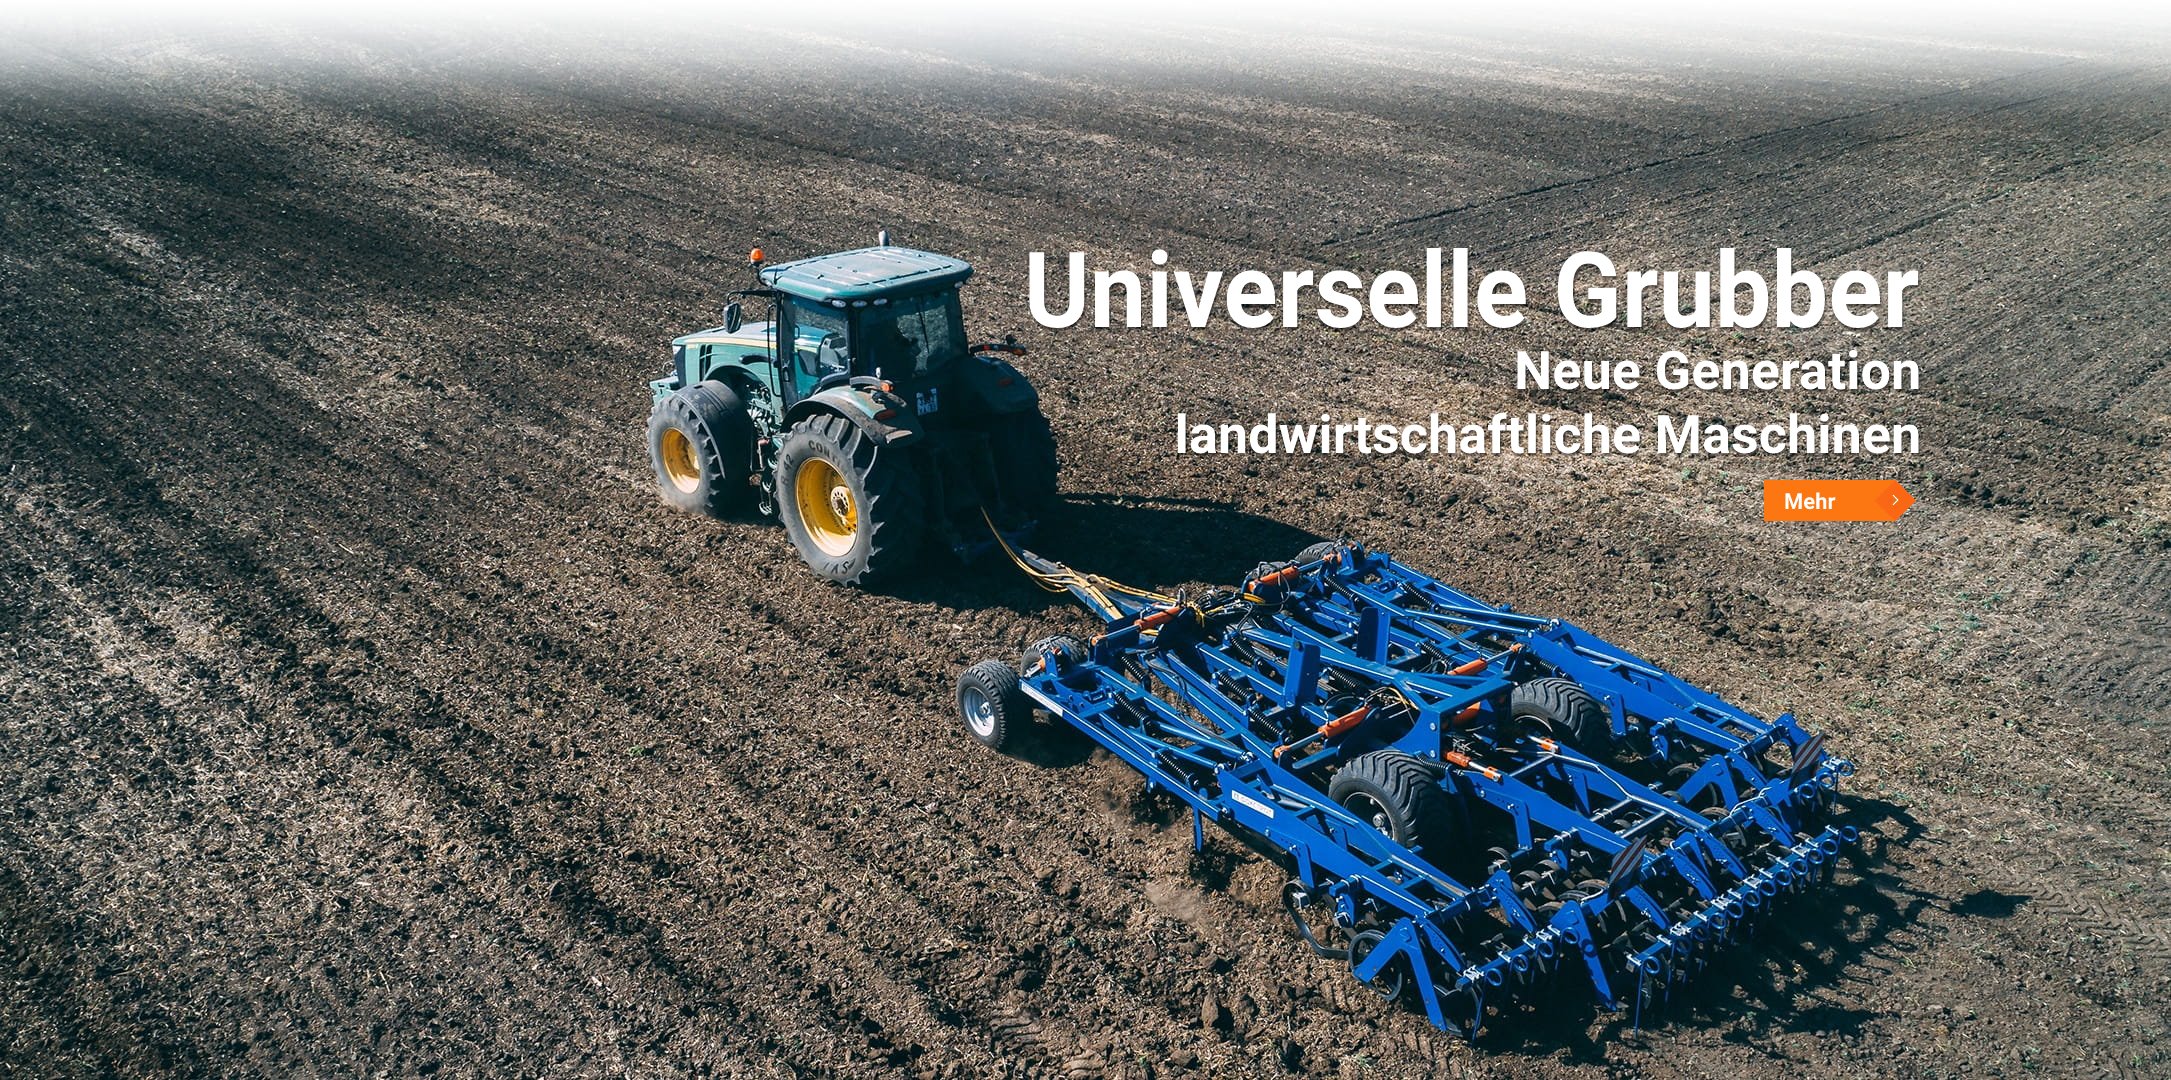 Universelle Grubber